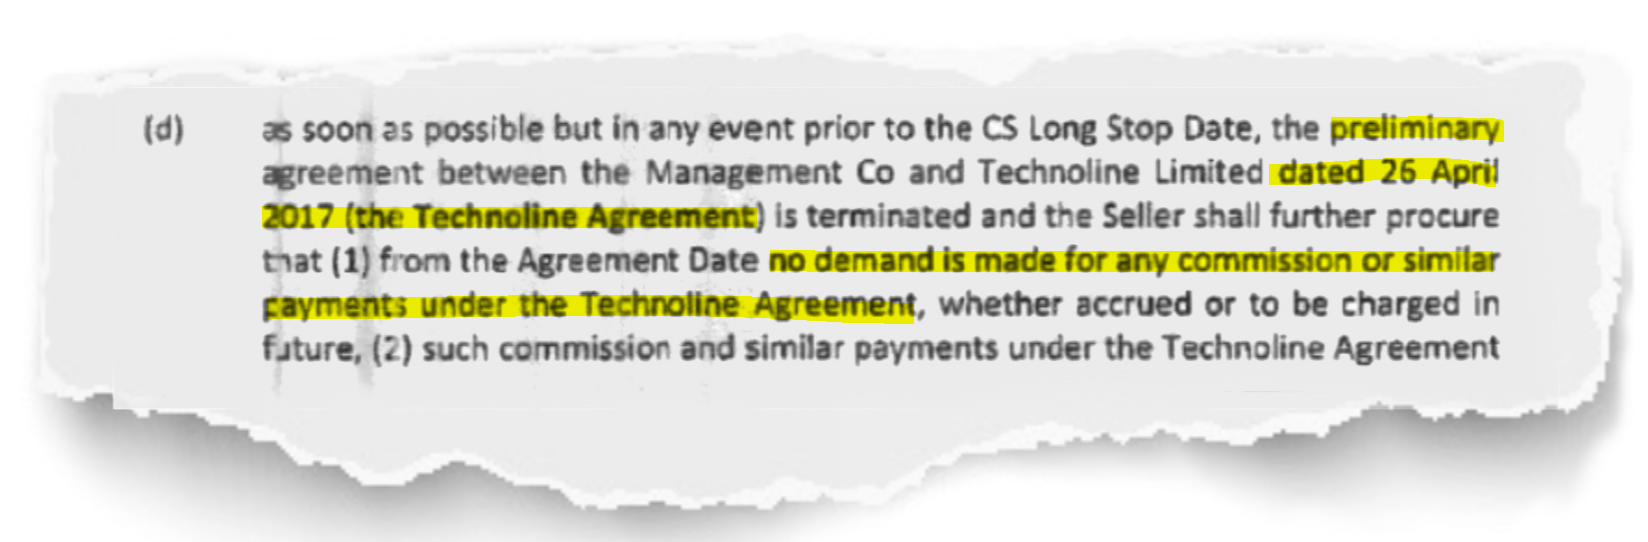 Excerpt from the Share Purchase Agreement referring to the Technoline Preliminary Agreement dated April 2017